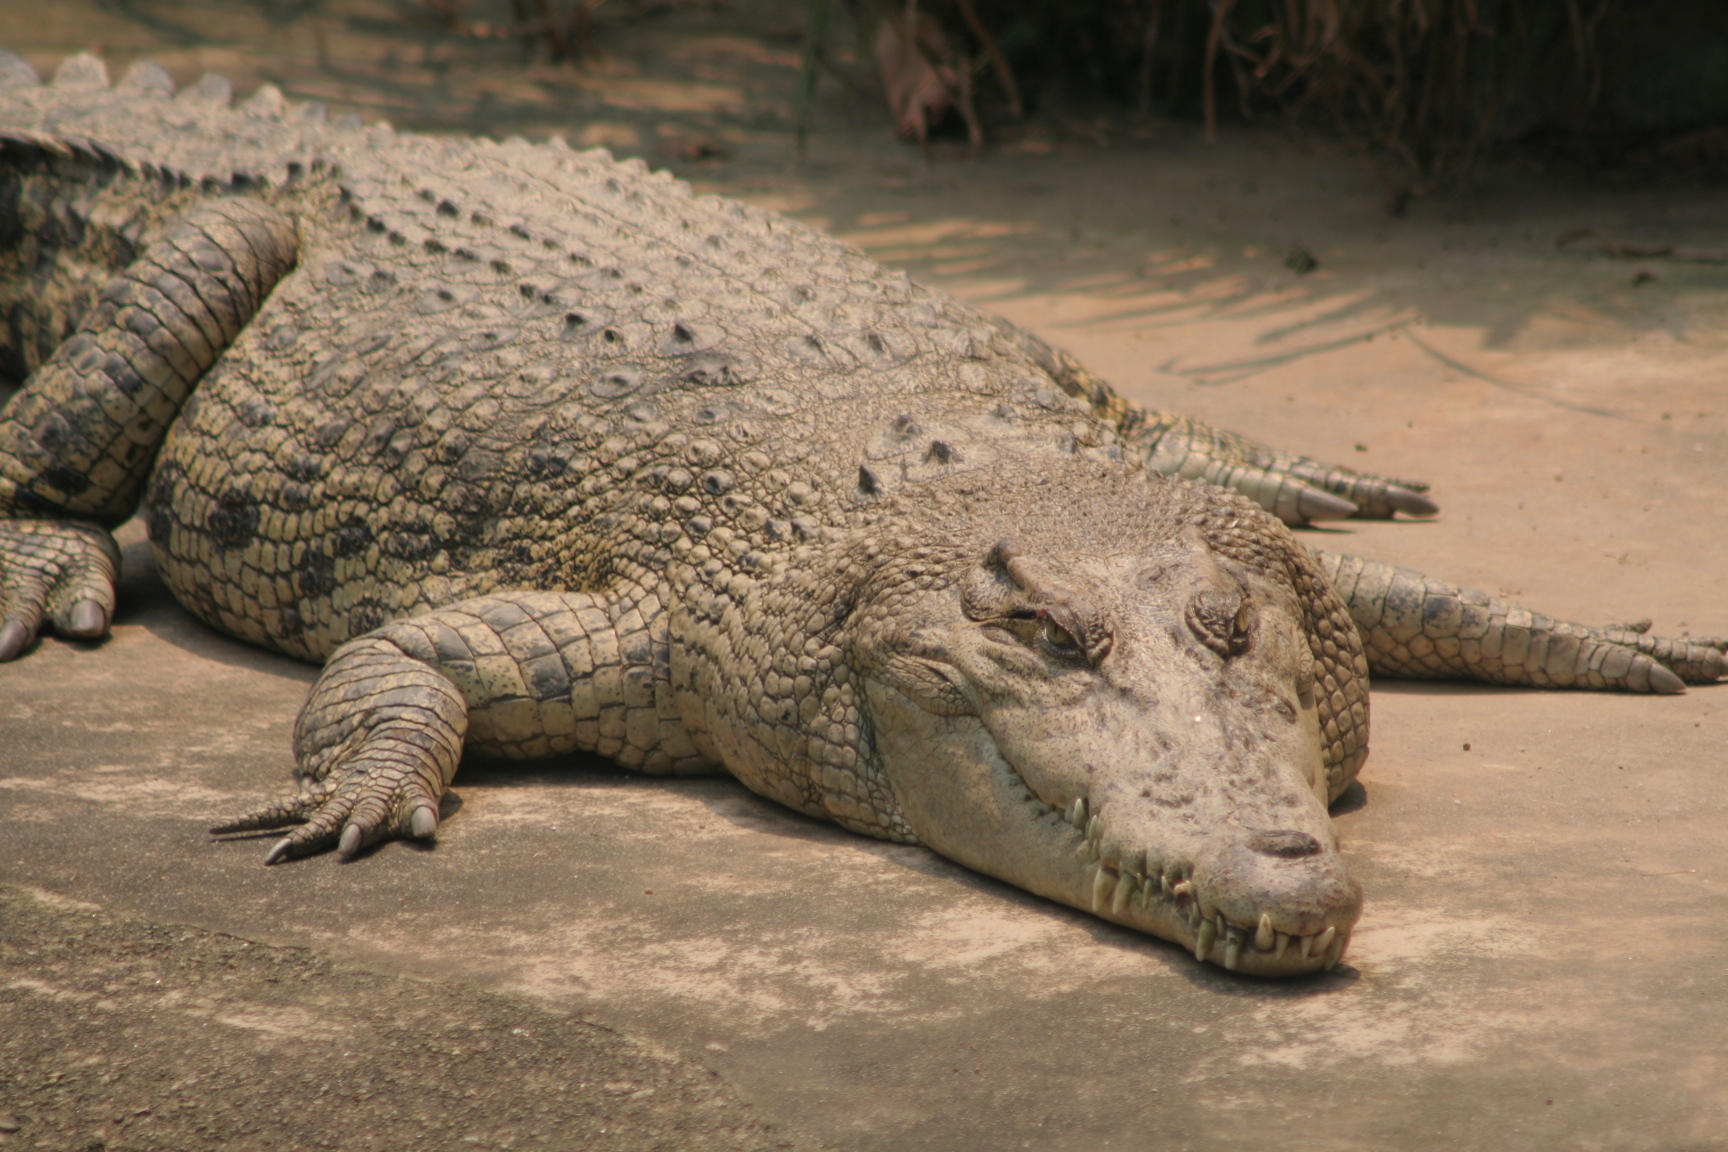 an alligator laying on a cement slab during the day